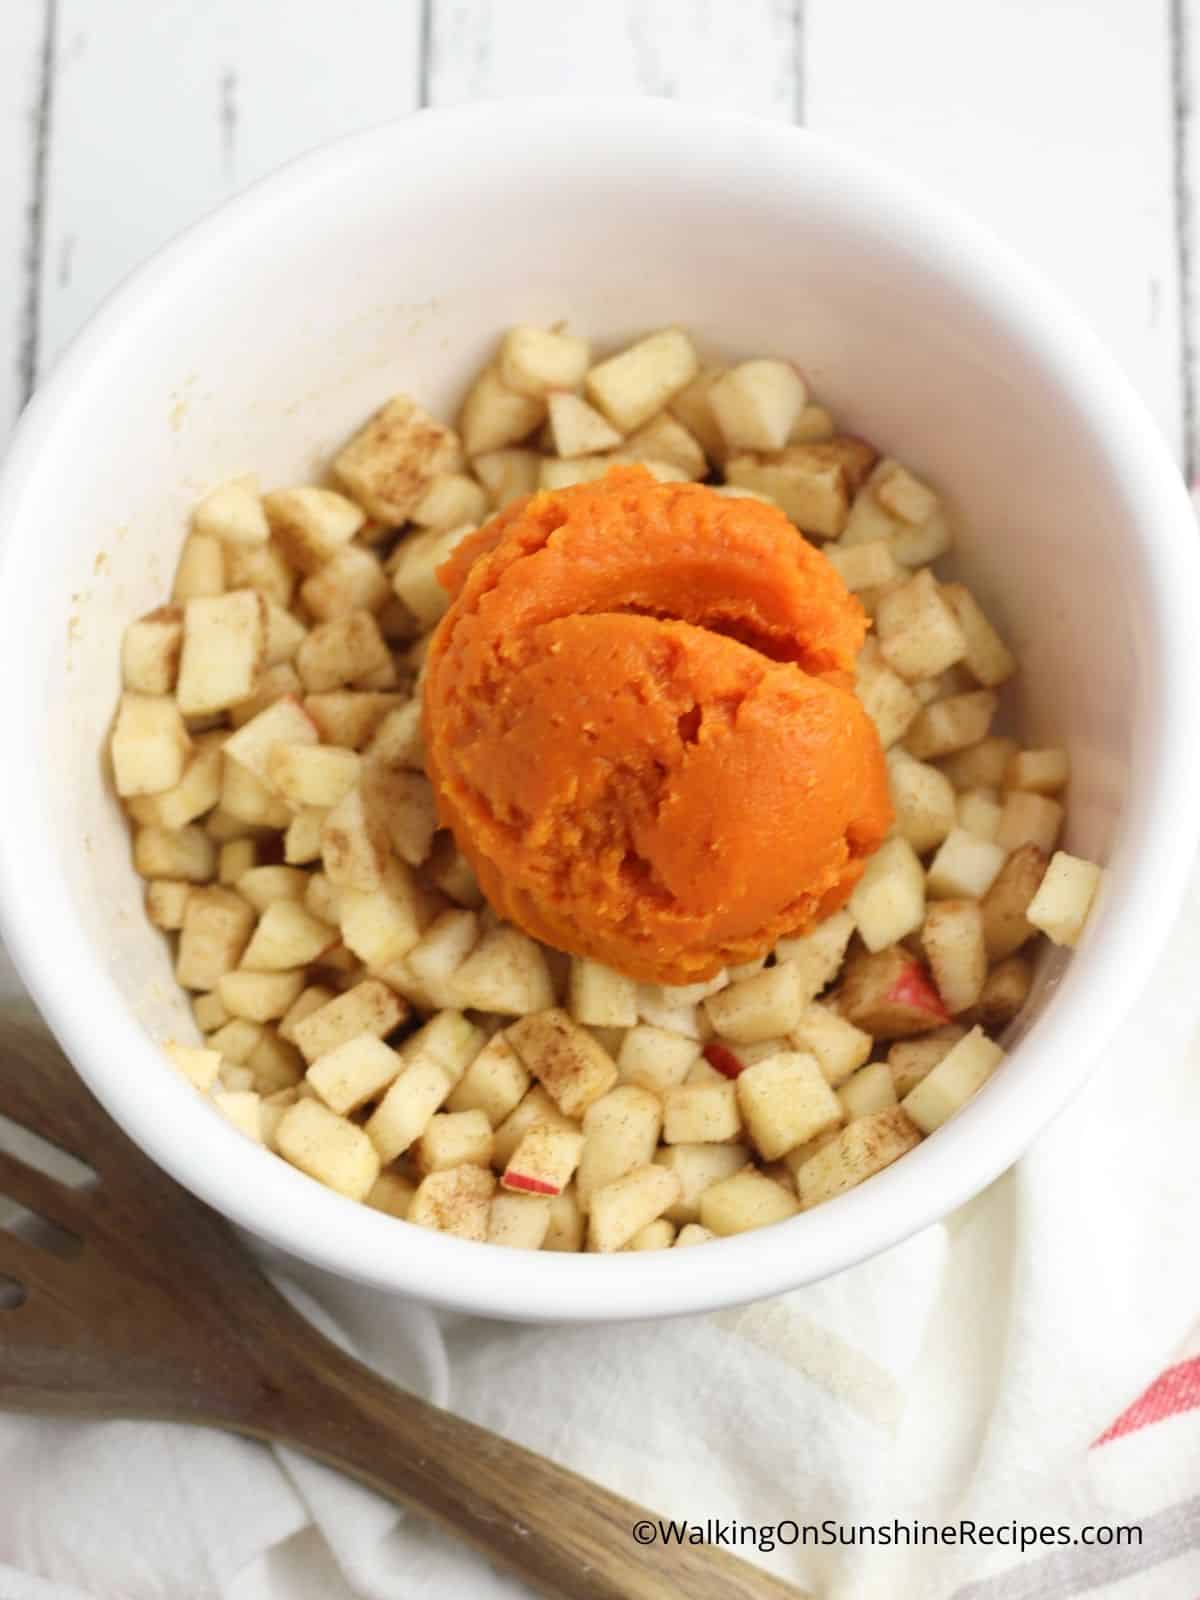 chopped apples with pumpkin puree on top in white bowl.